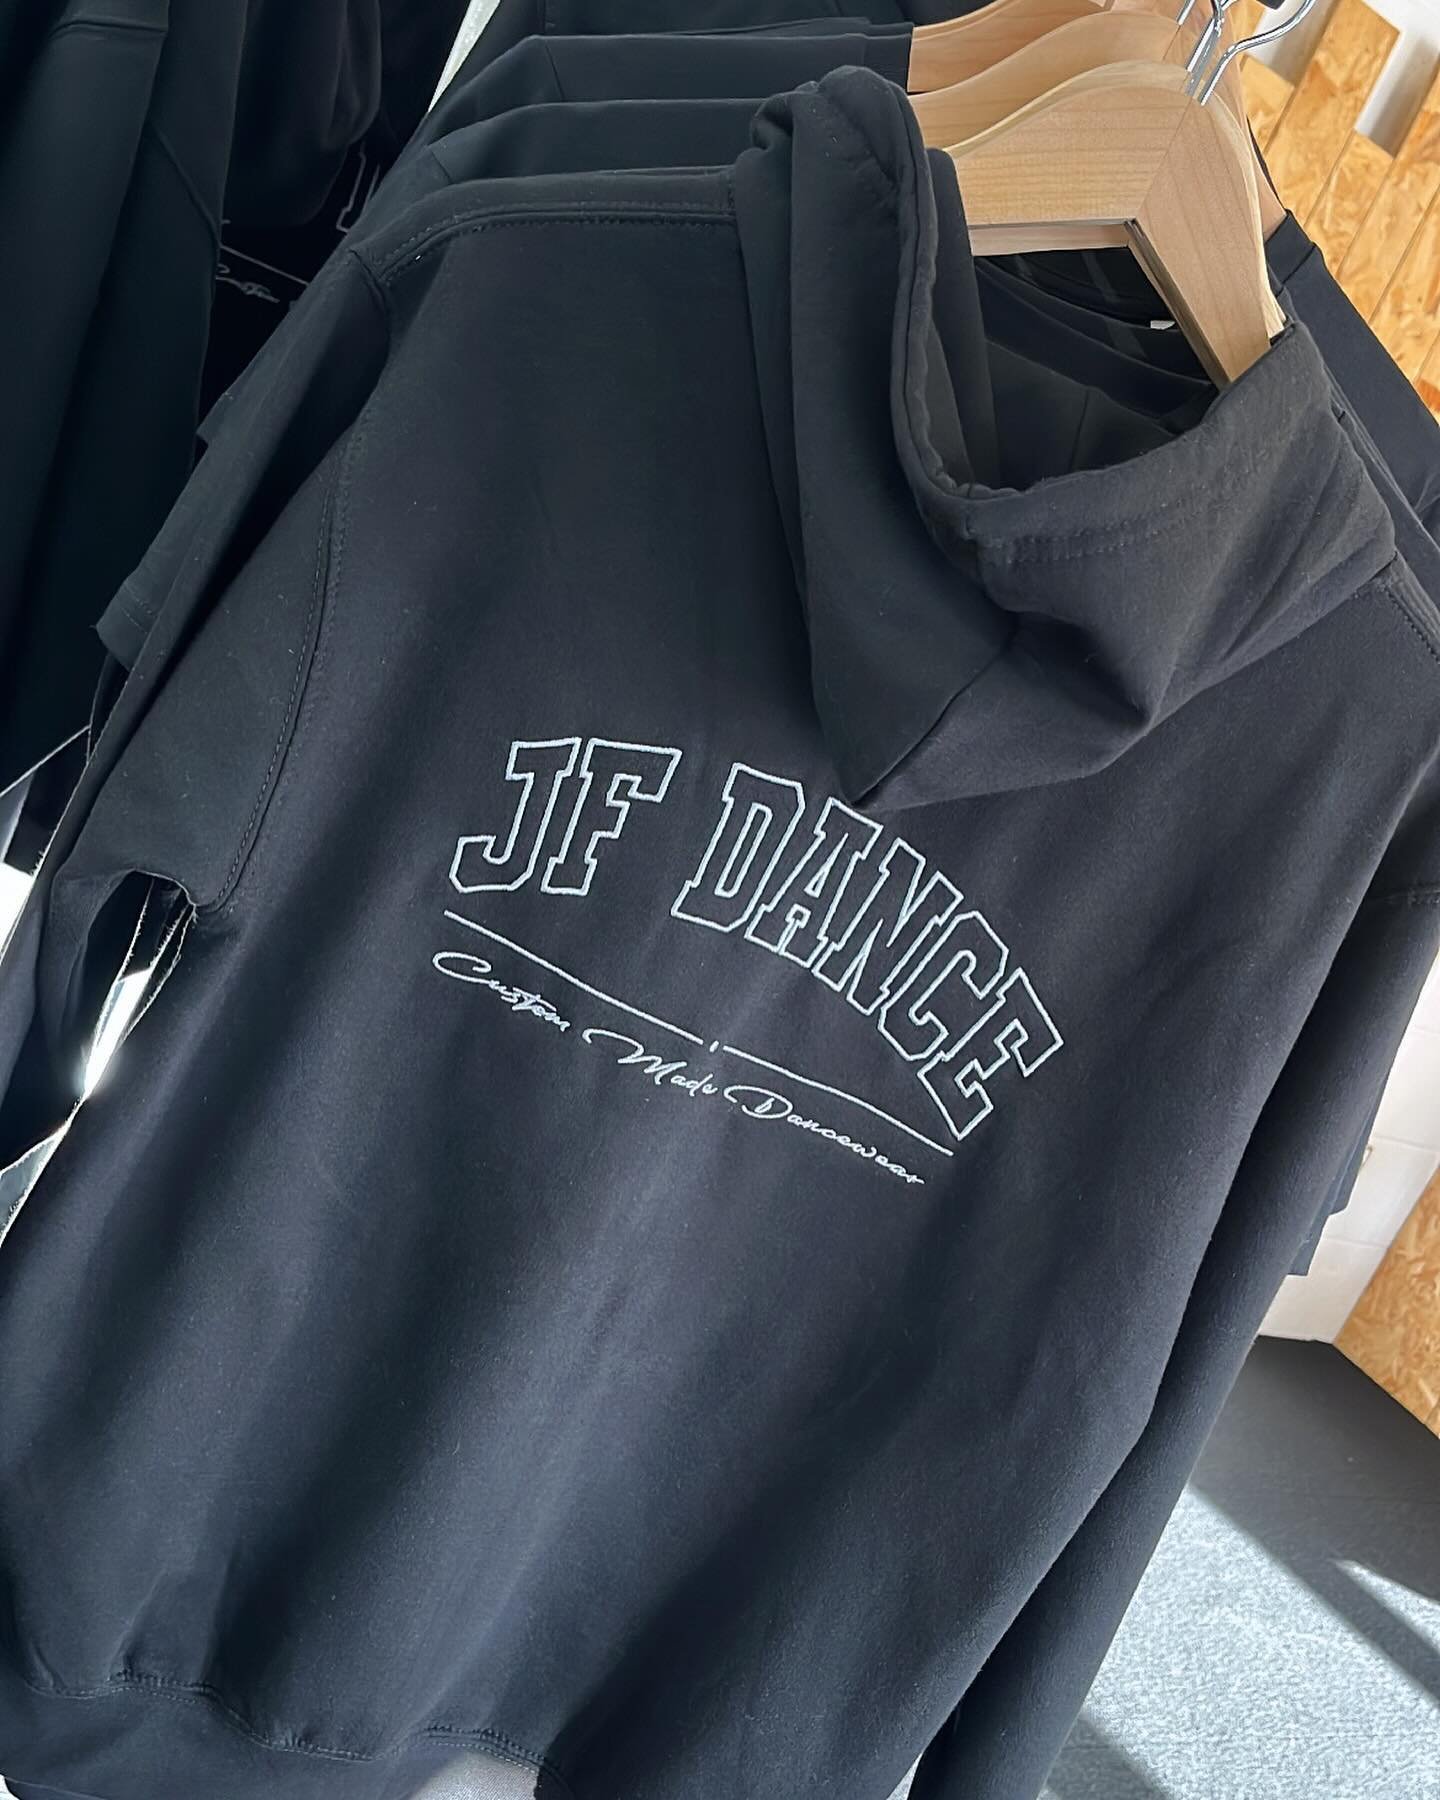 Check out 👀 our new JF Dance embroidered zip hoodies 💫🖤
 
Kids &pound;30 sizes 5-6, 7-8, 9-11, 12-14
Adults &pound;35 sizes S, M, L XL

#jfdance #dance #dancer #embroidered #hoodie